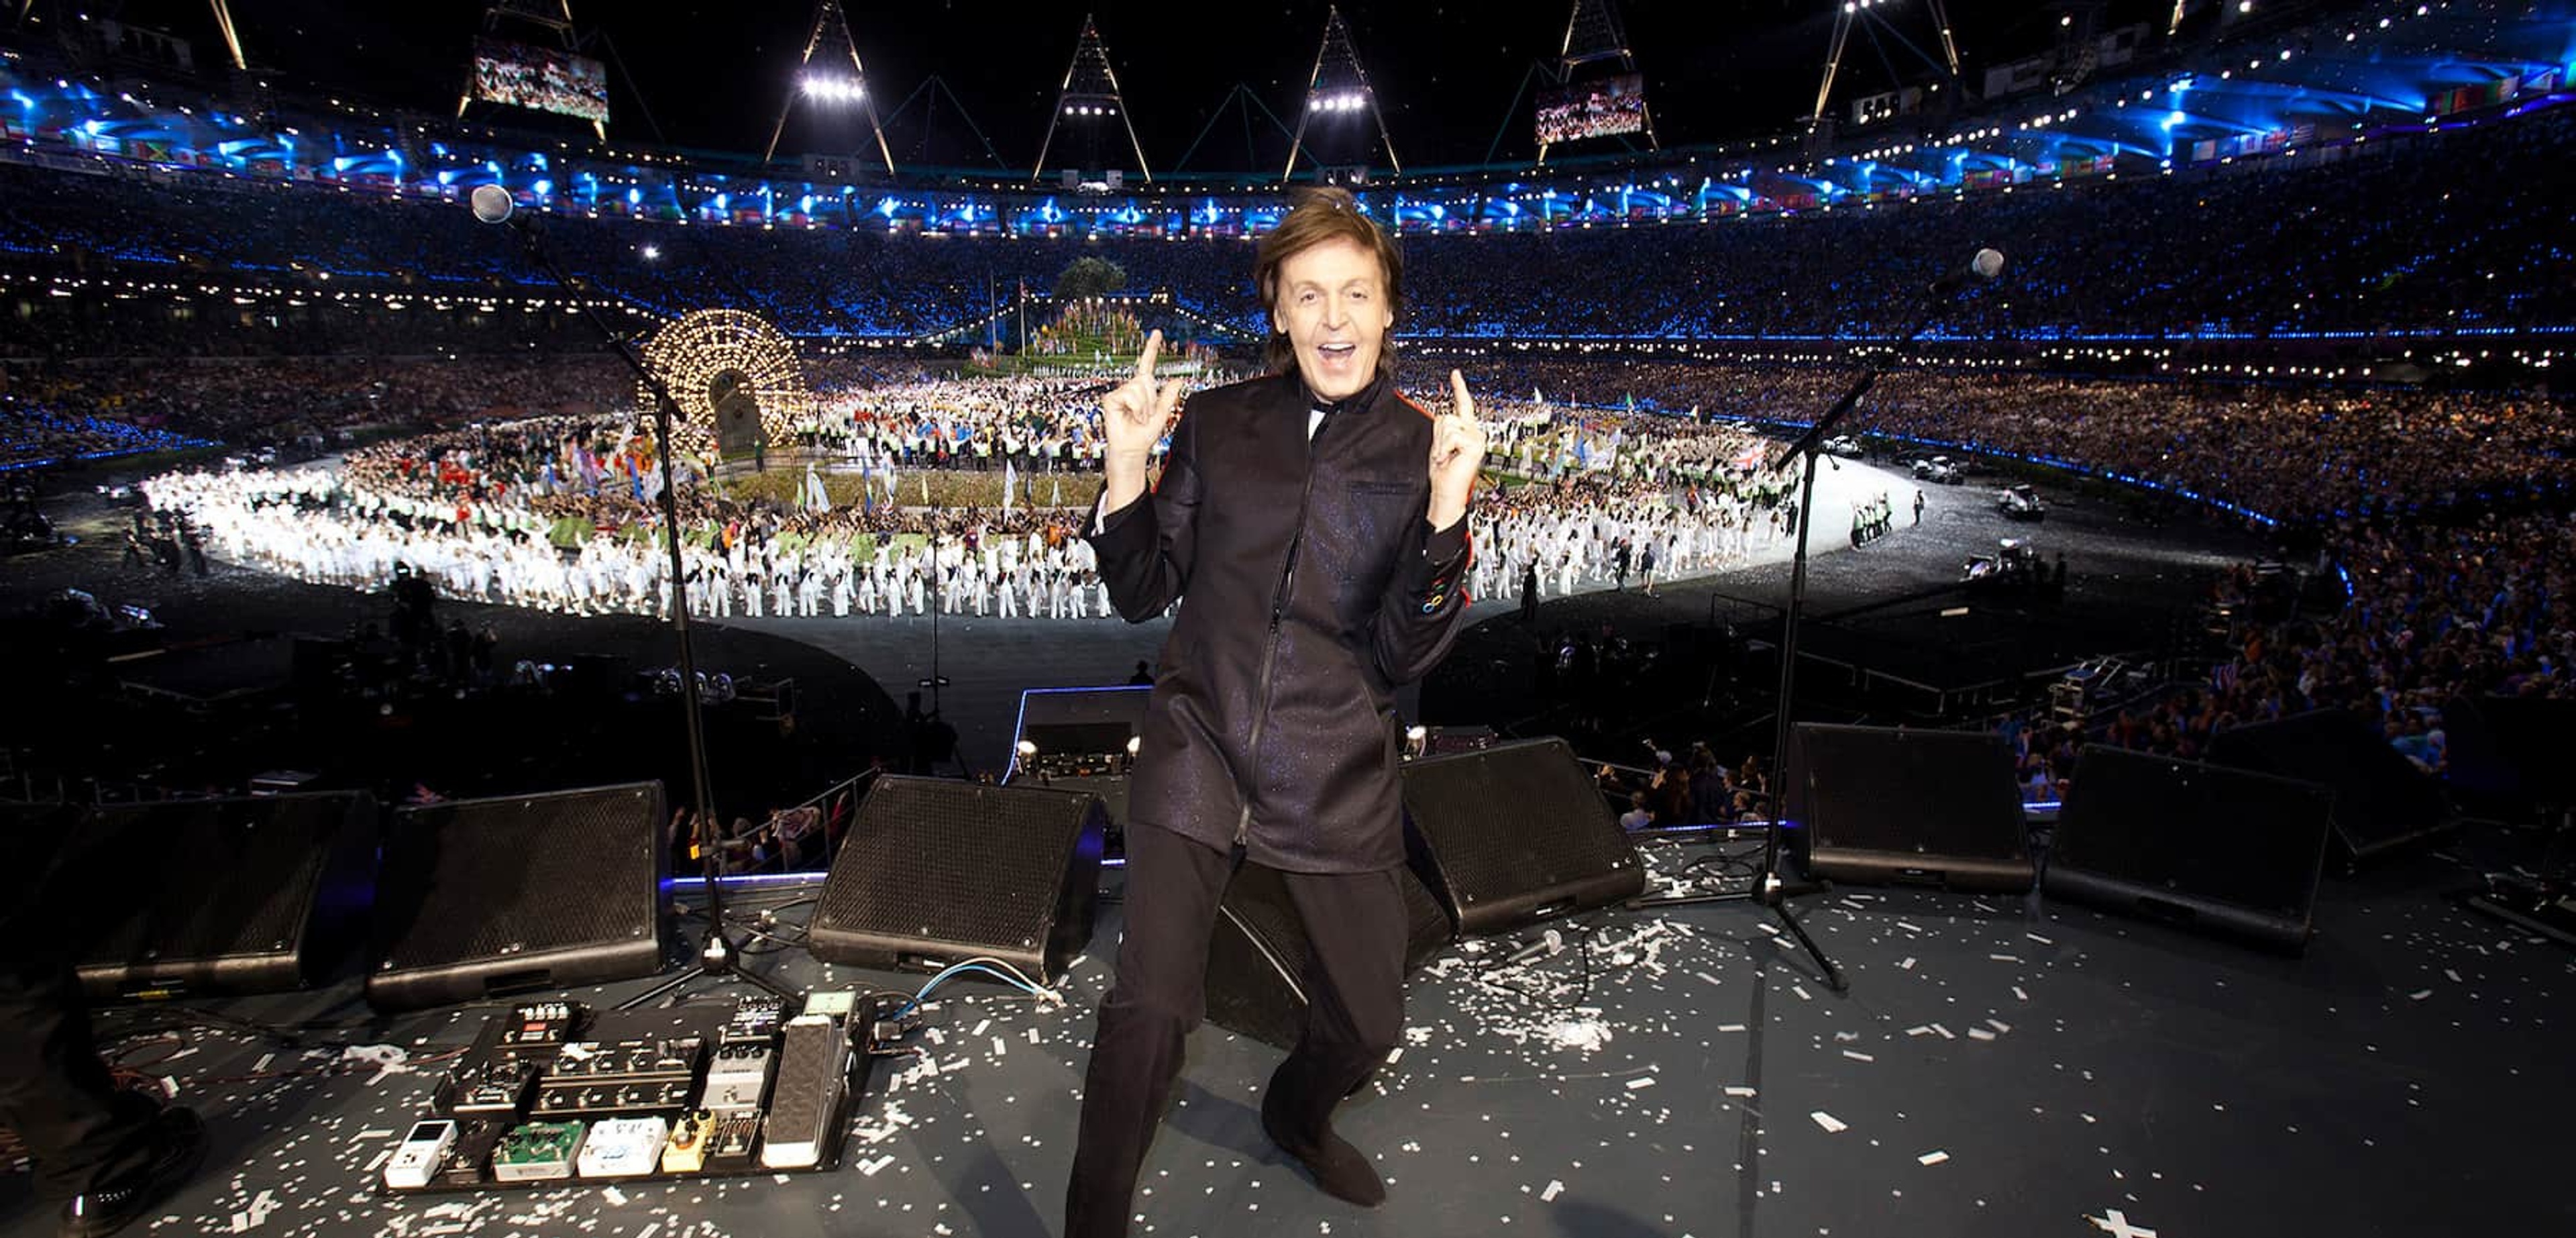 Photo of Paul at the Olympics opening ceremony 